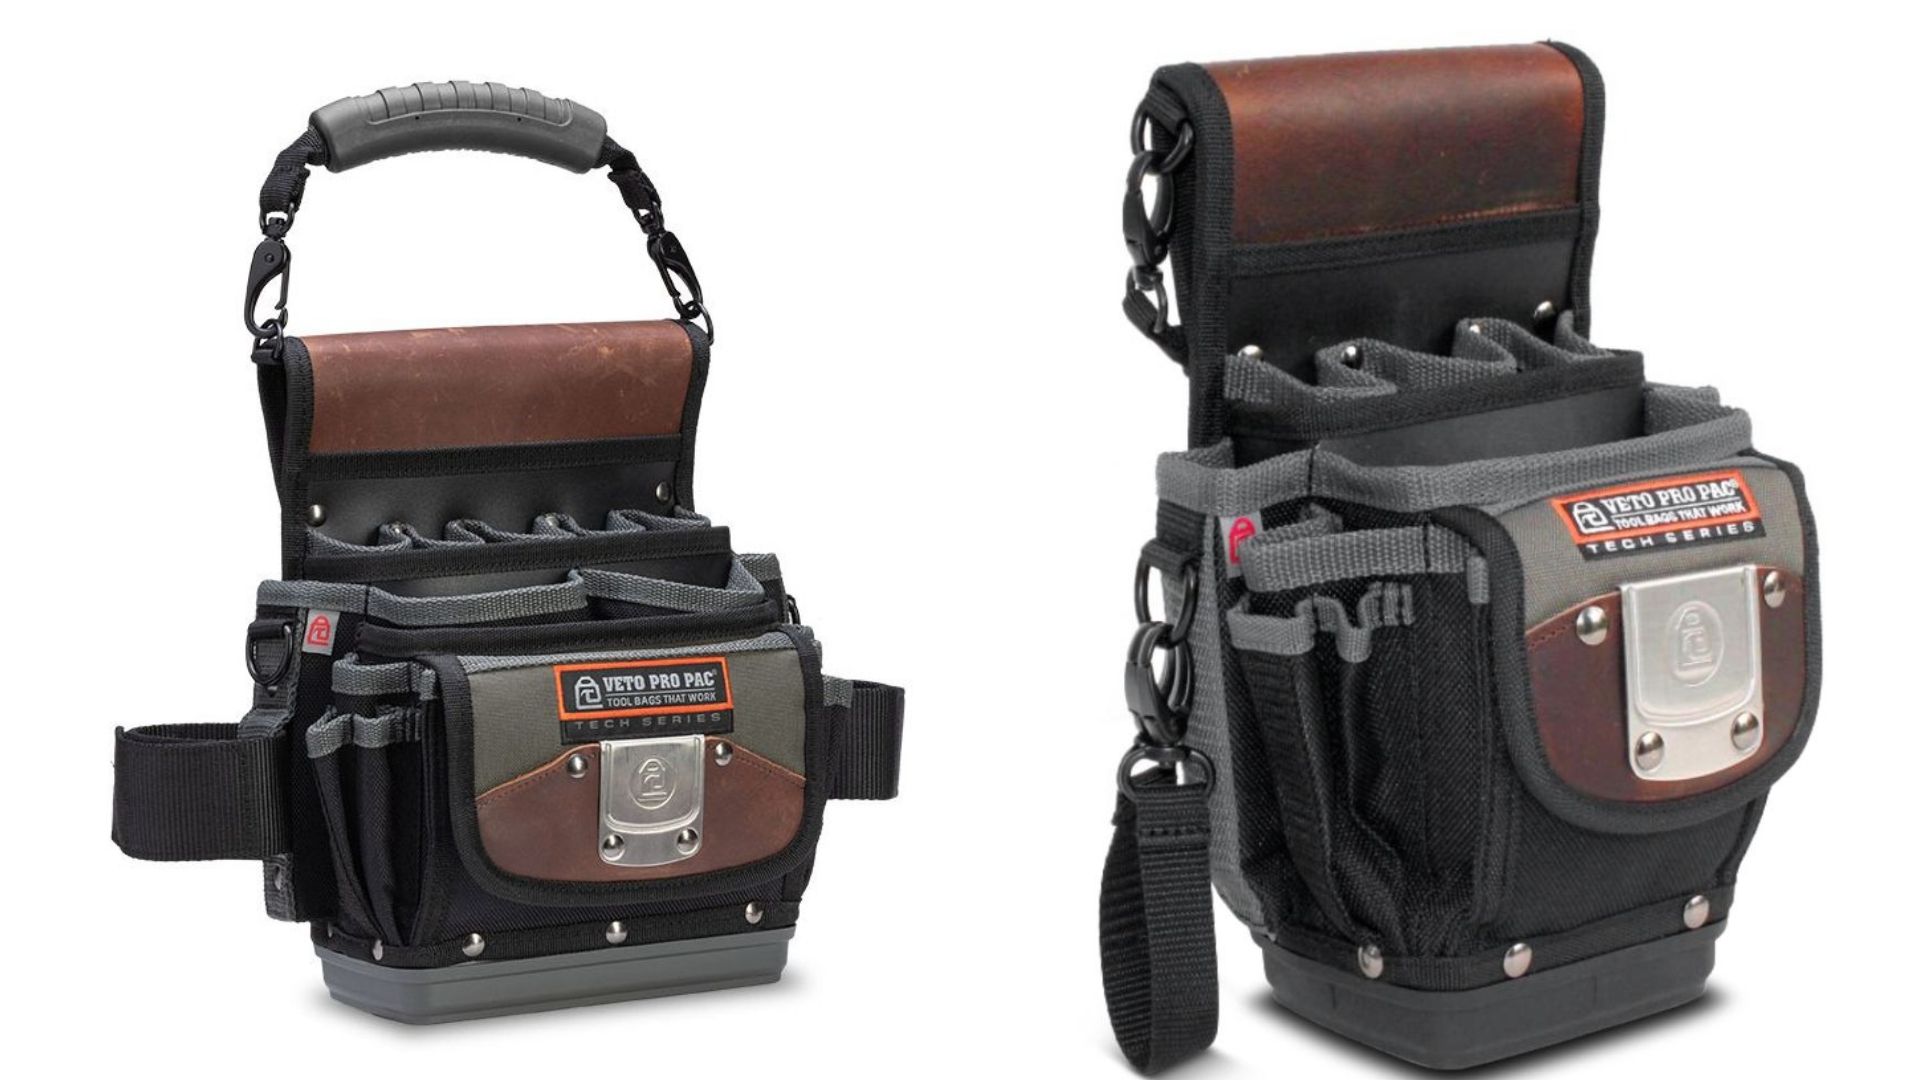 Two types of the best veto pro pacs.